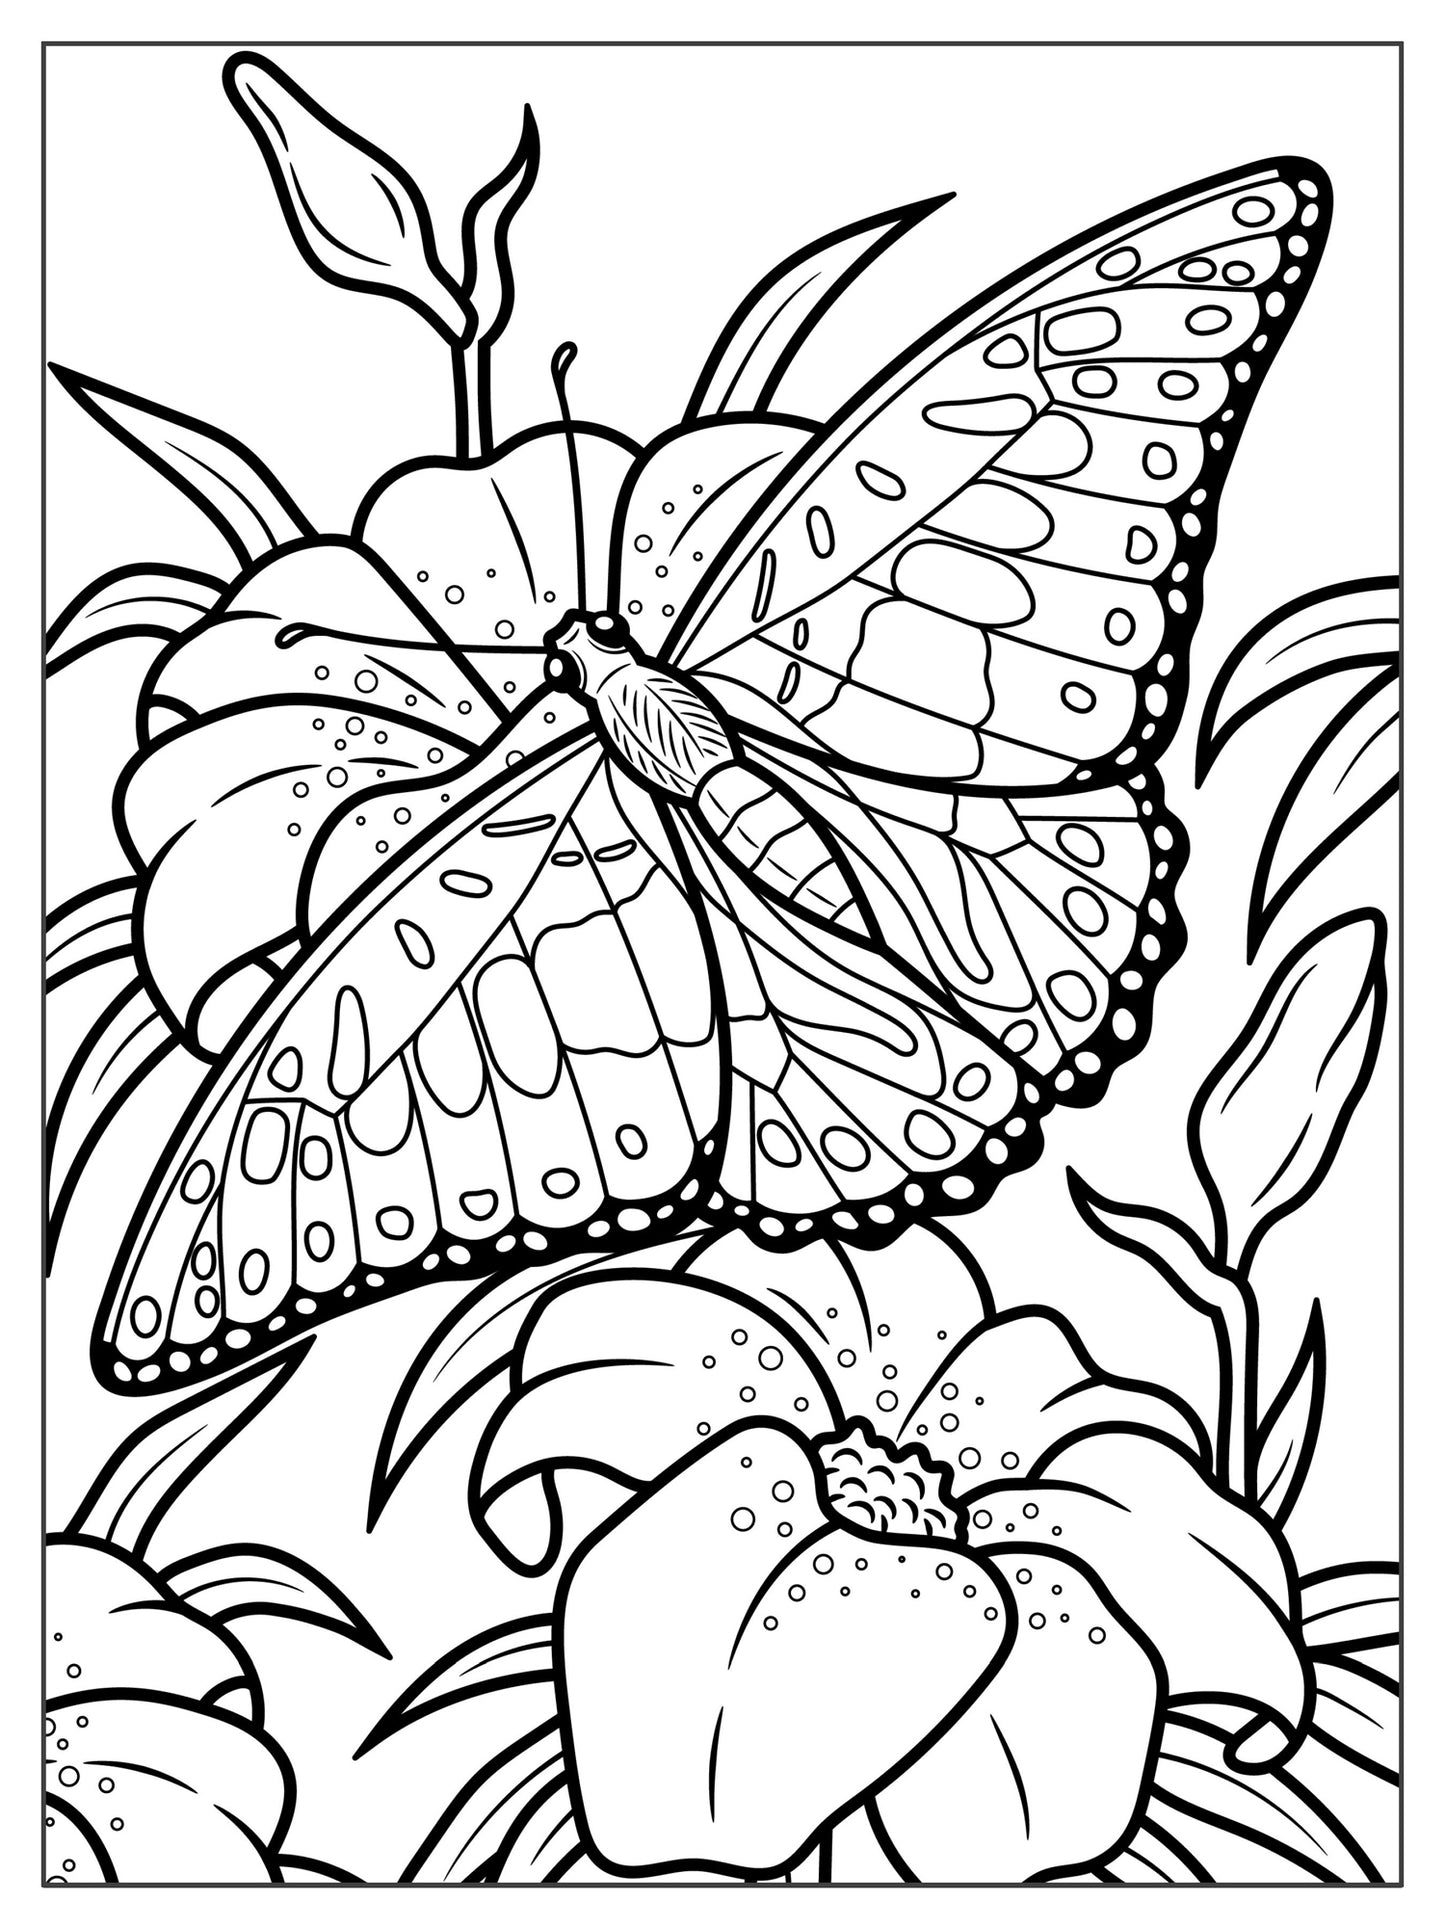 Garden Friends Coloring Poster 3 Pack